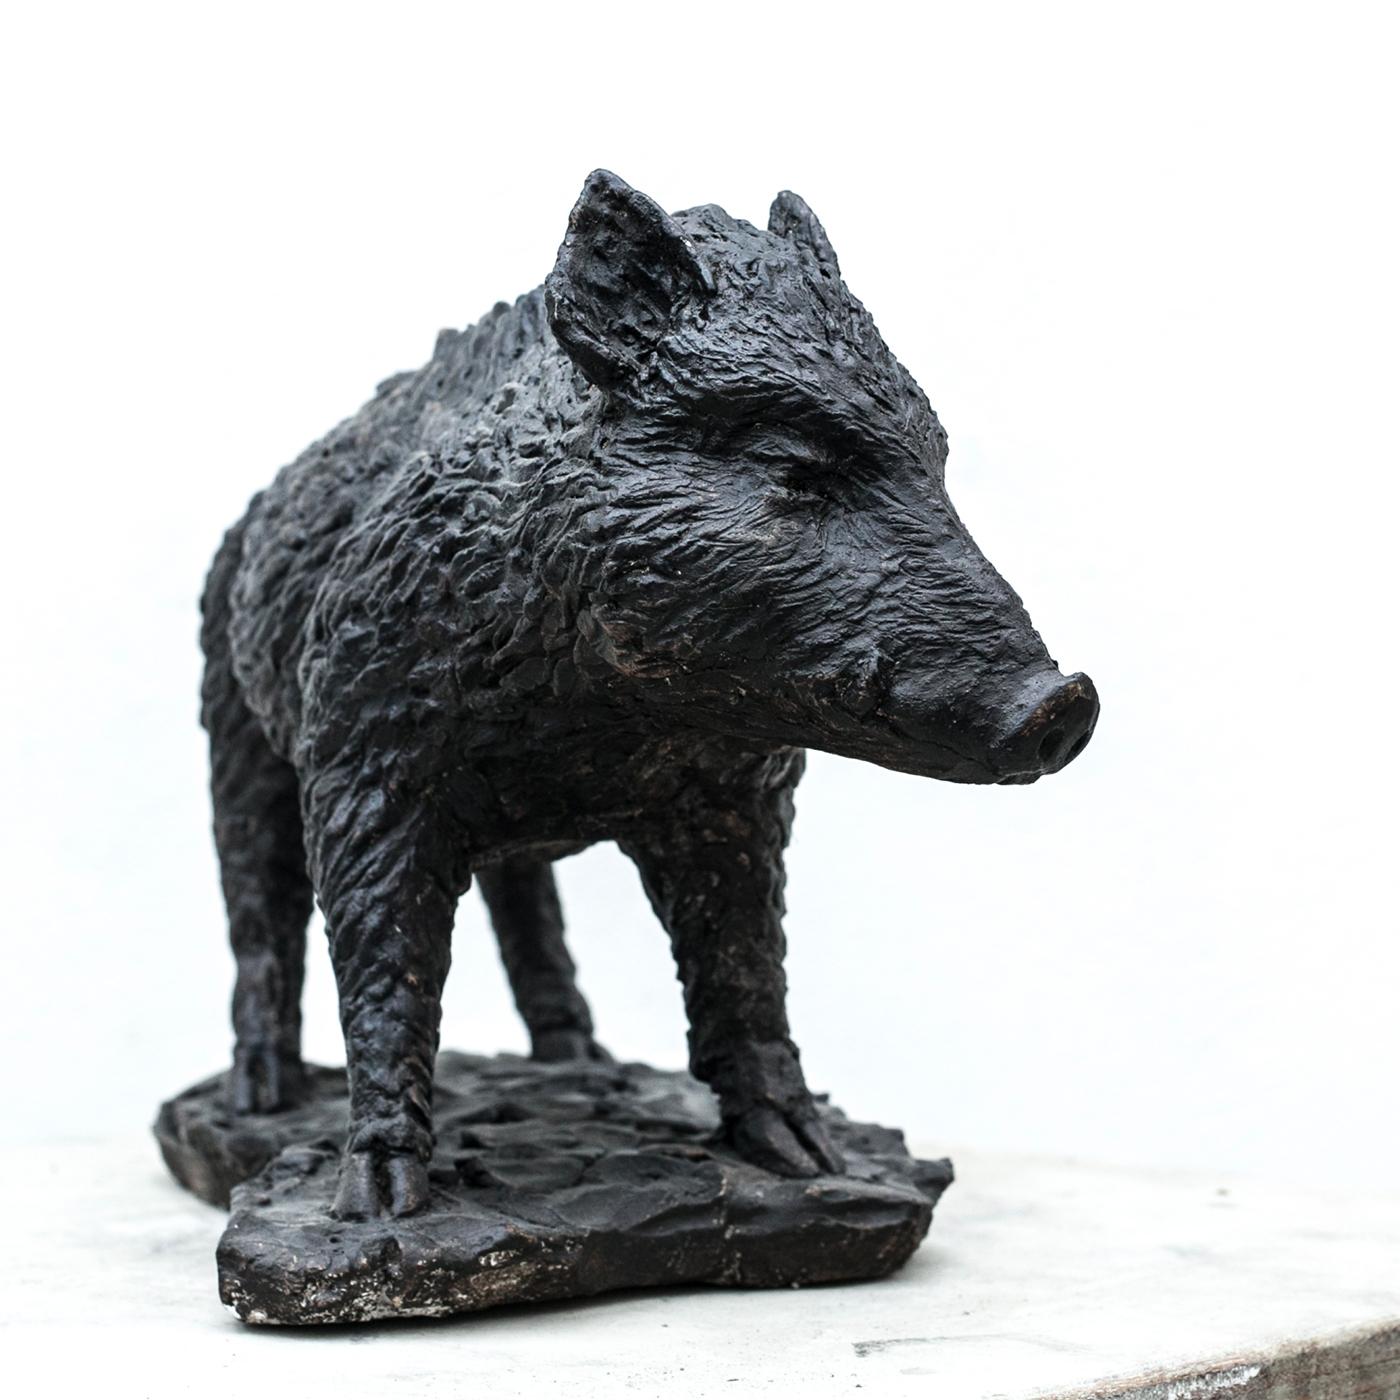 Part of a series of sculpture crafted by Vincenzo Romanelli as a homage to the wilderness of his region, Tuscany, this piece was made in 2015. It depicts with vivid detail and elegant sense of movement a young wild boar as it stands in its local